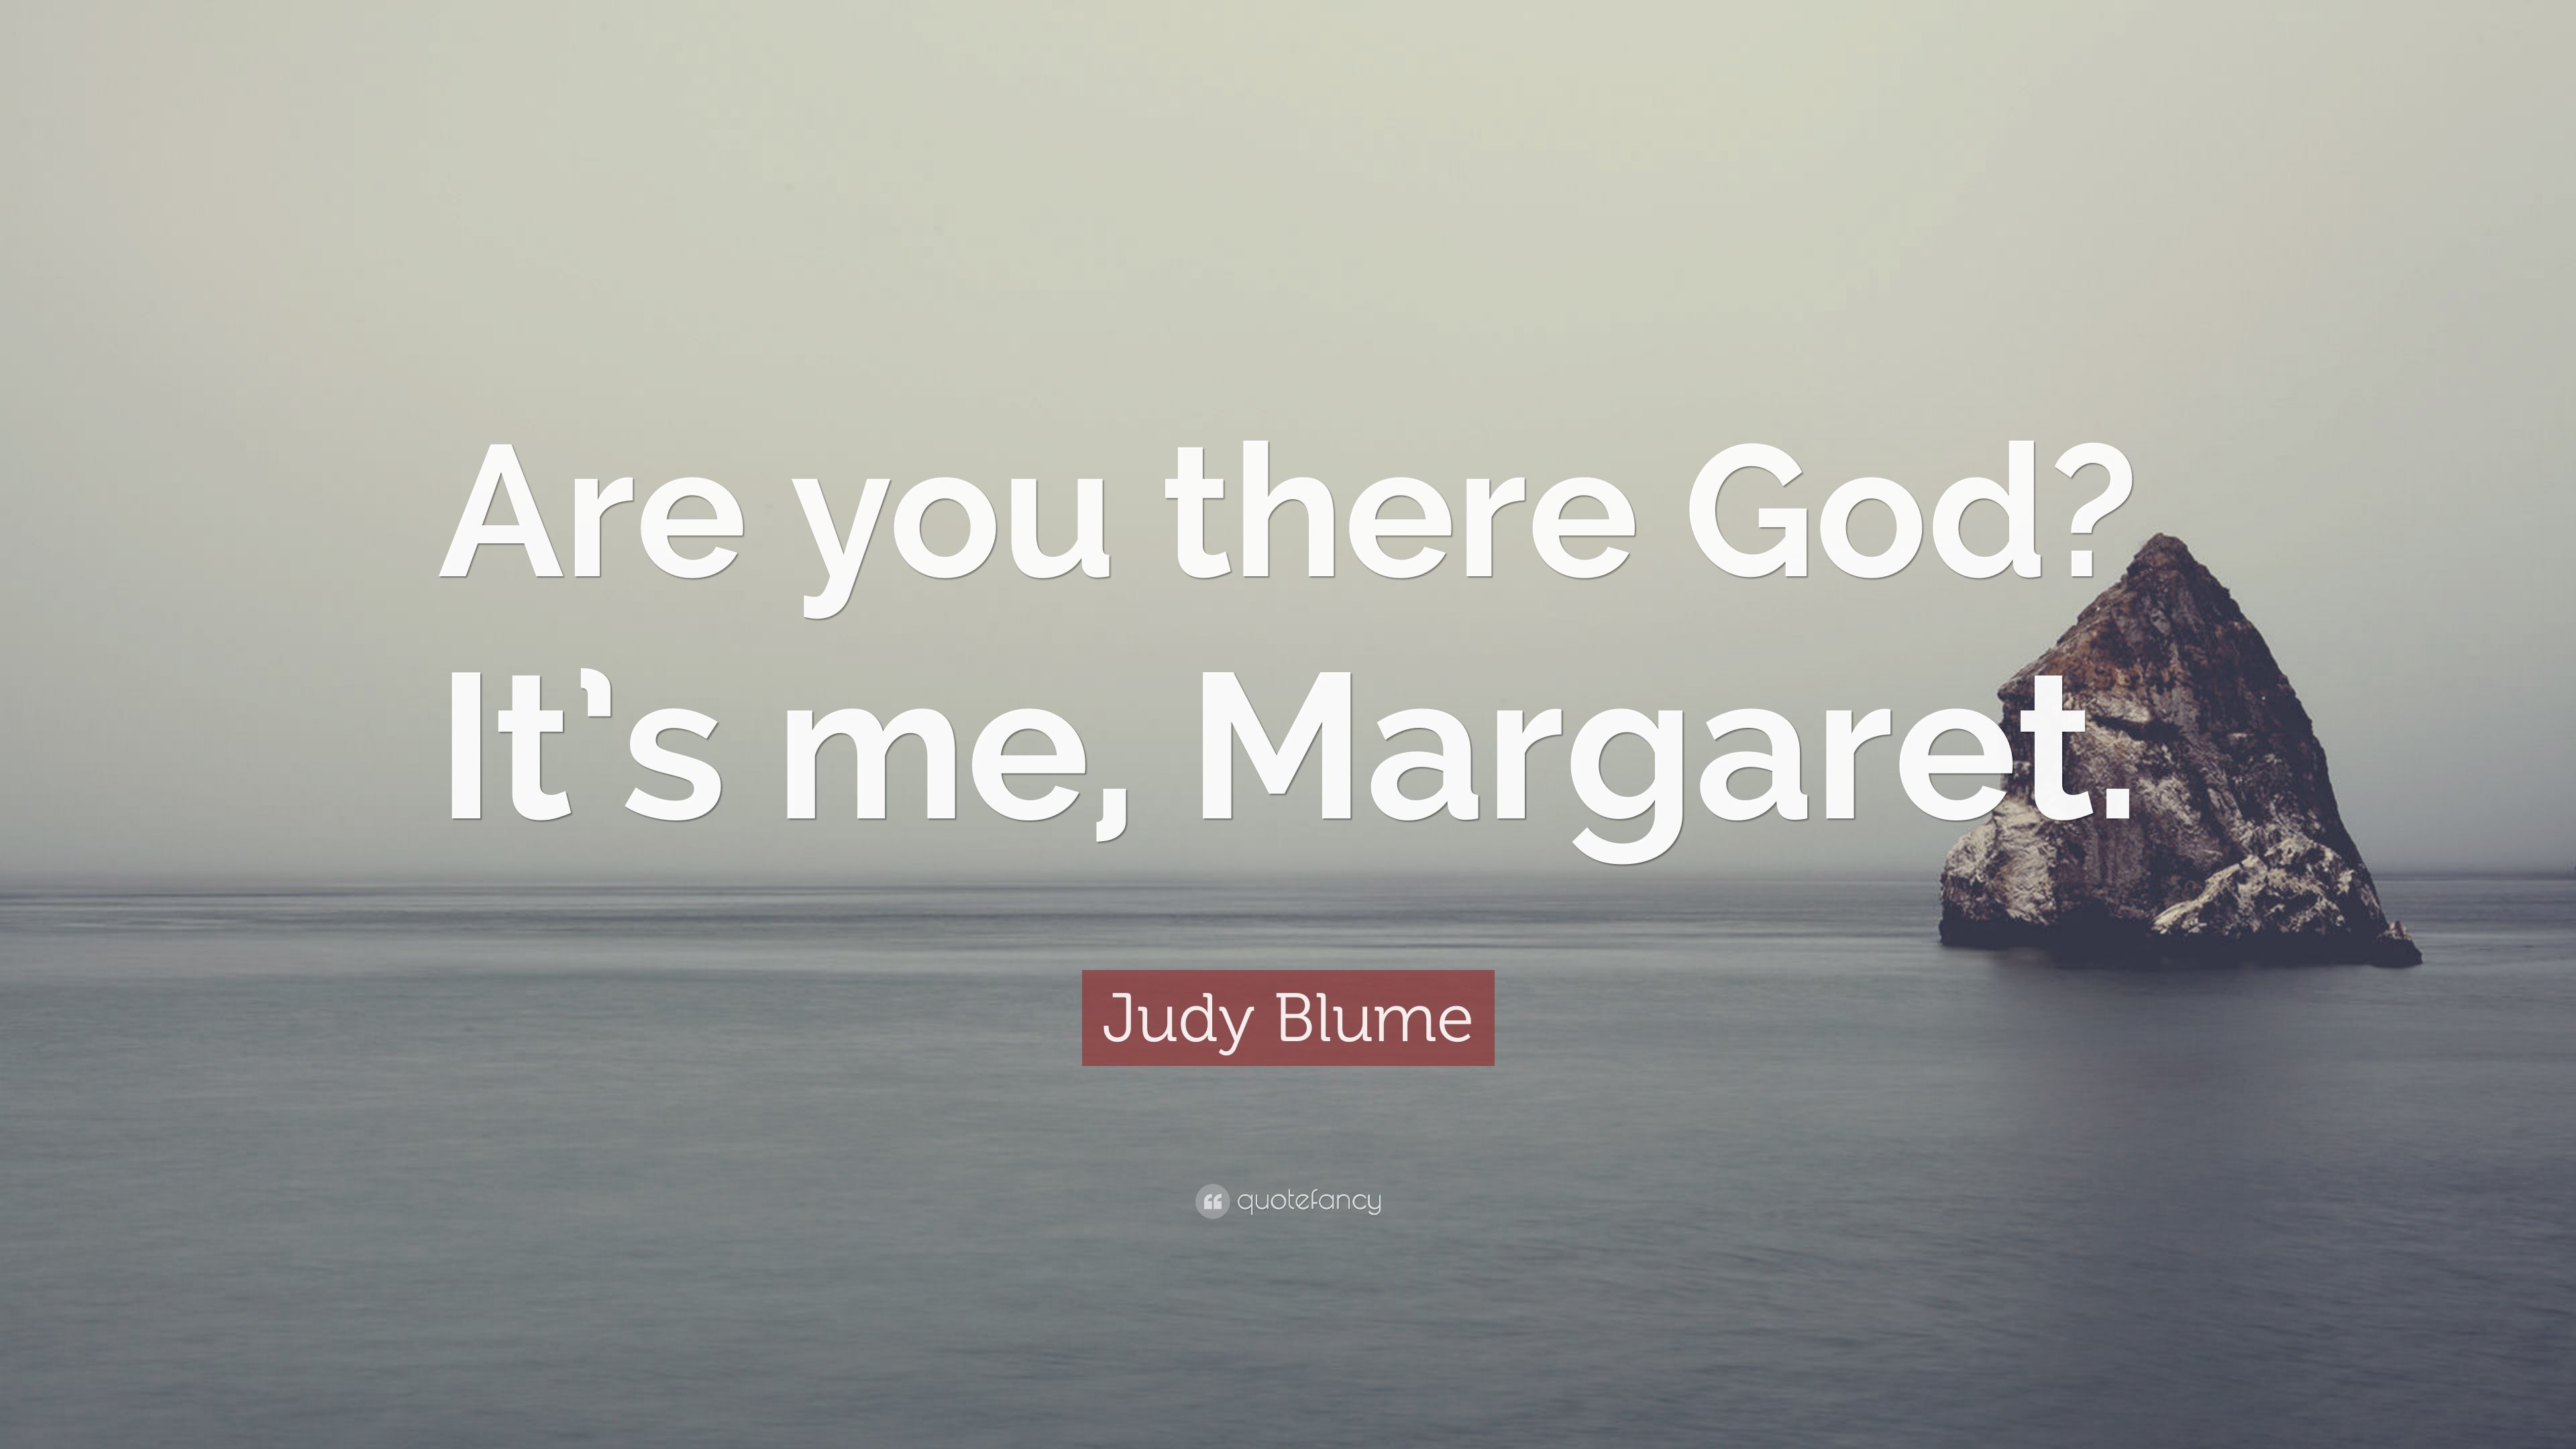 Judy Blume Quote: "Are you there God? 